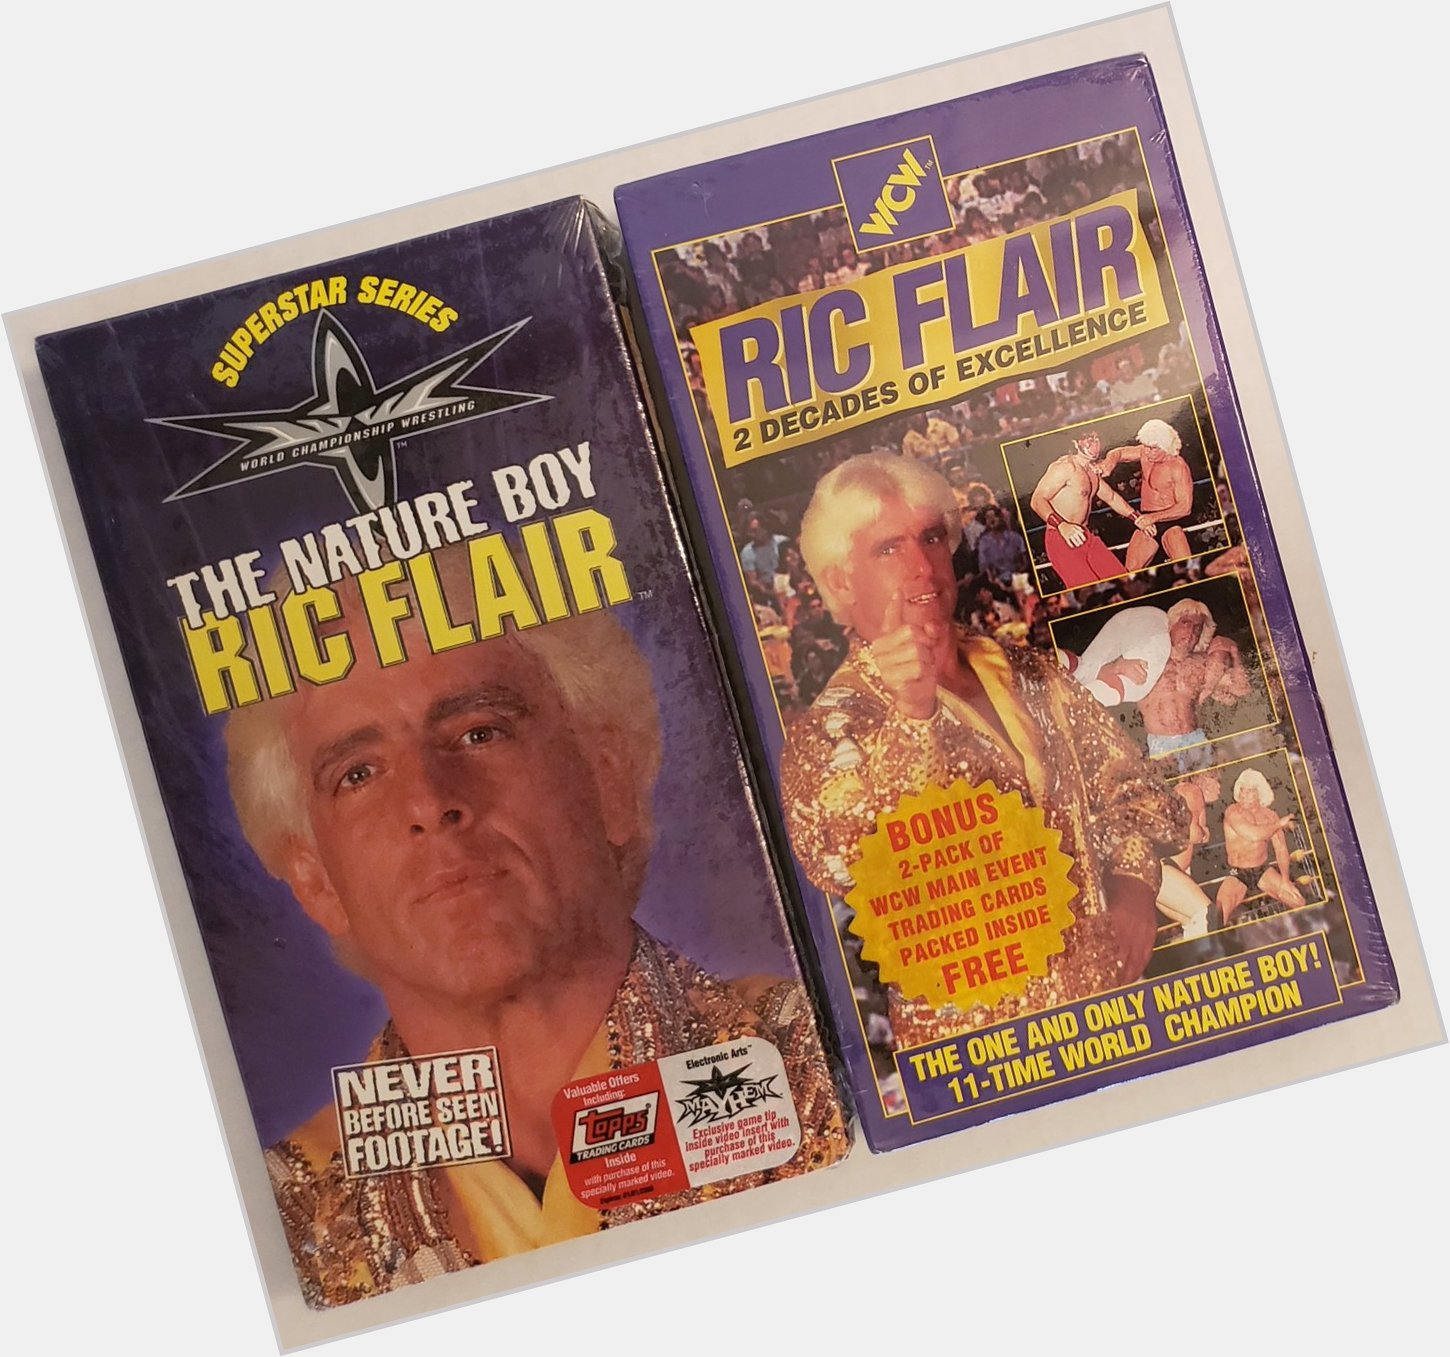 Happy Birthday to the Nature Boy Ric Flair       